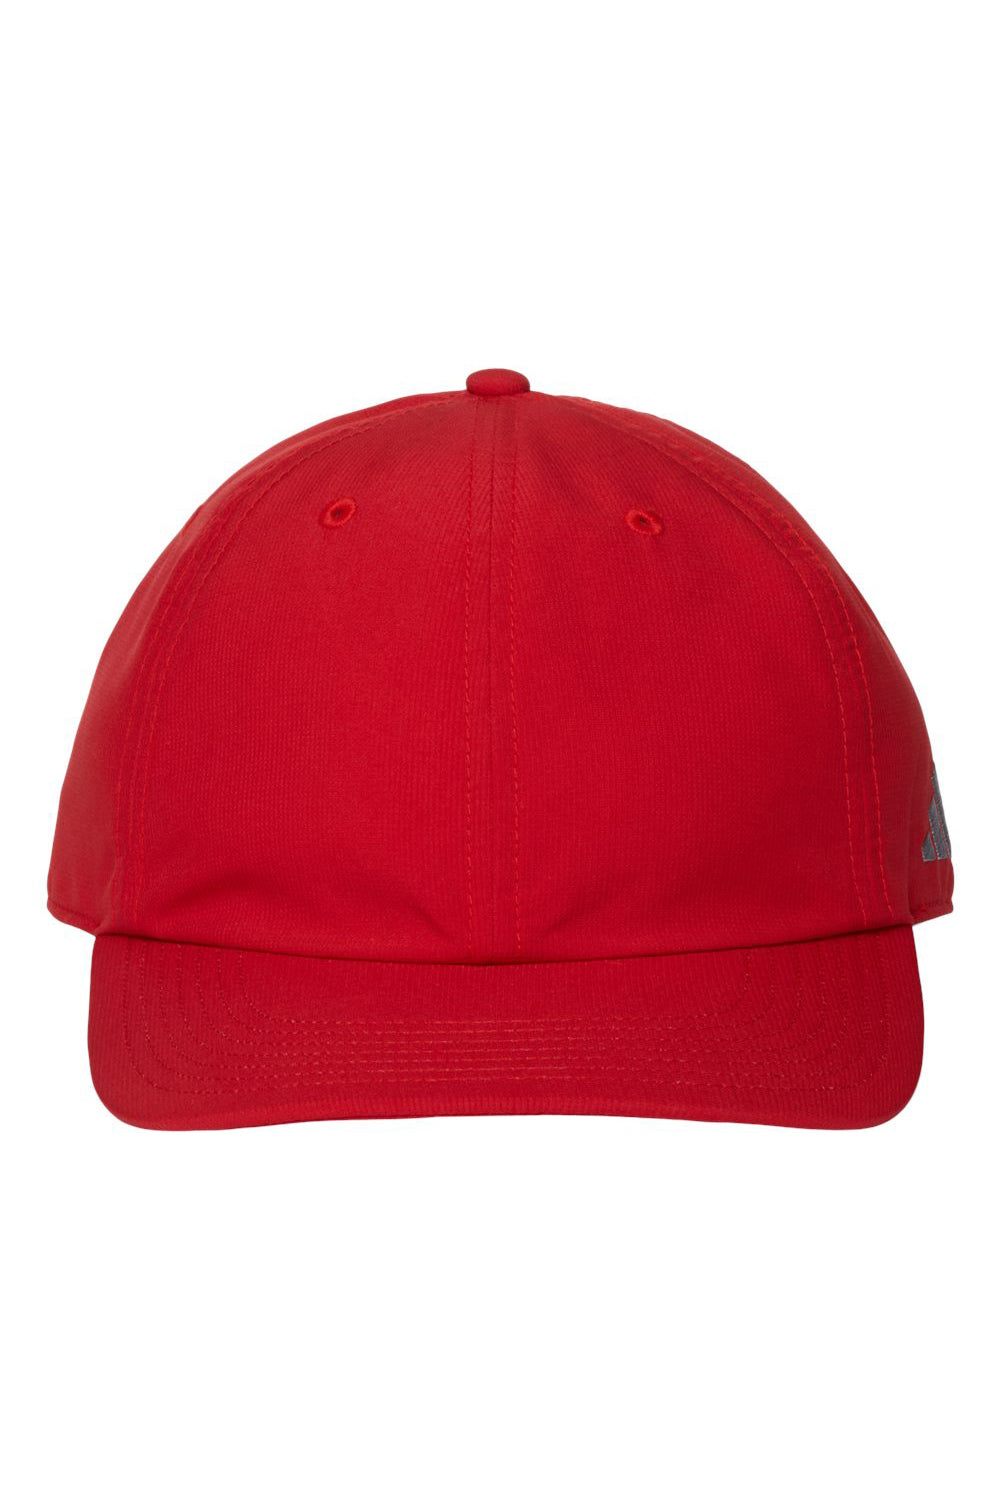 Adidas A600S Mens Sustainable Performance Max Moisture Wicking Snapback Hat Power Red Flat Front